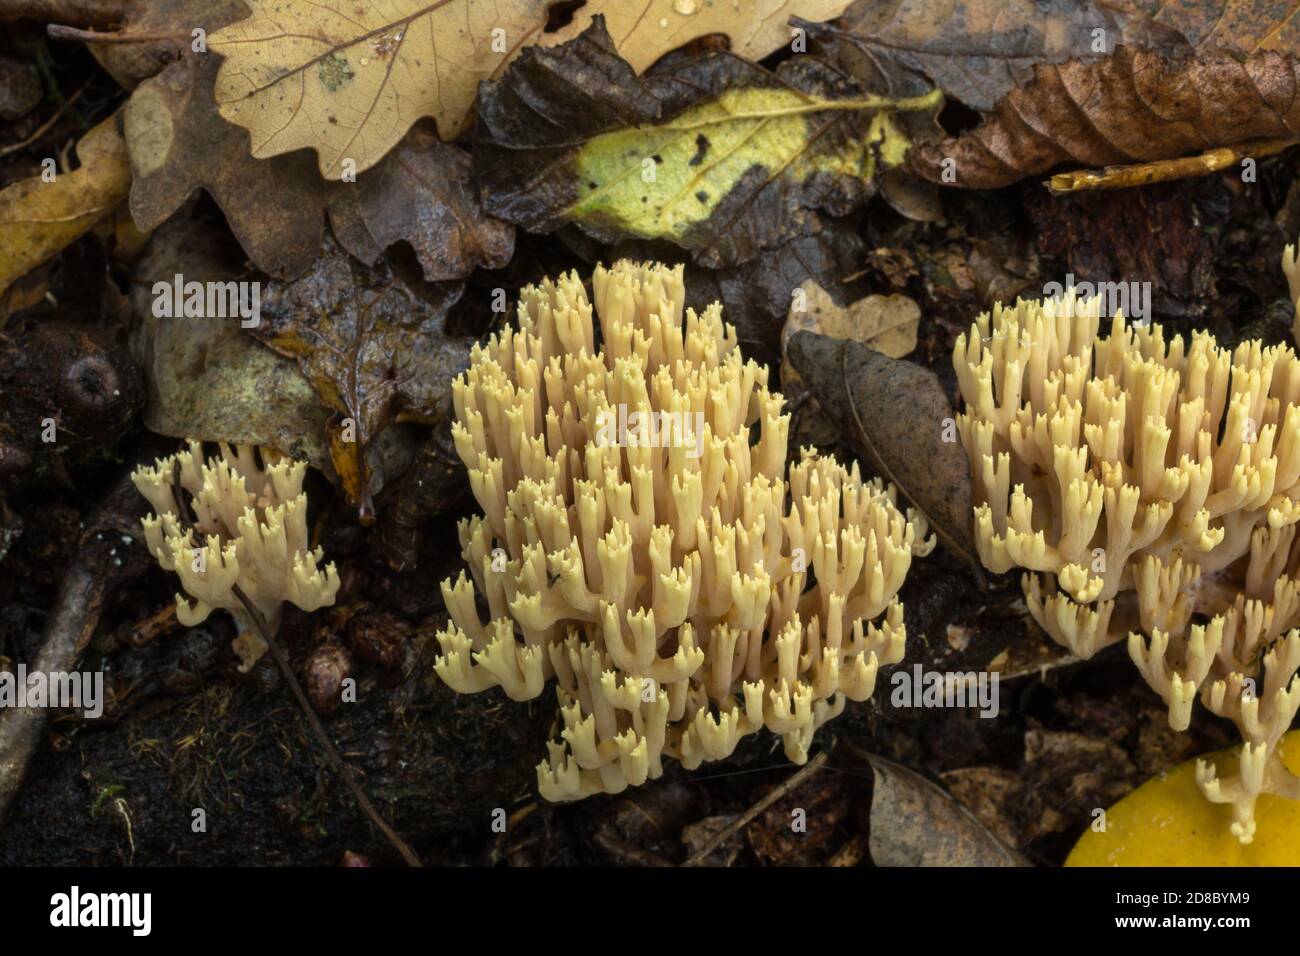 A group of coral fungus or artomyces pyxidatus growing in some profusion in wet, heavy woodland. Stock Photo